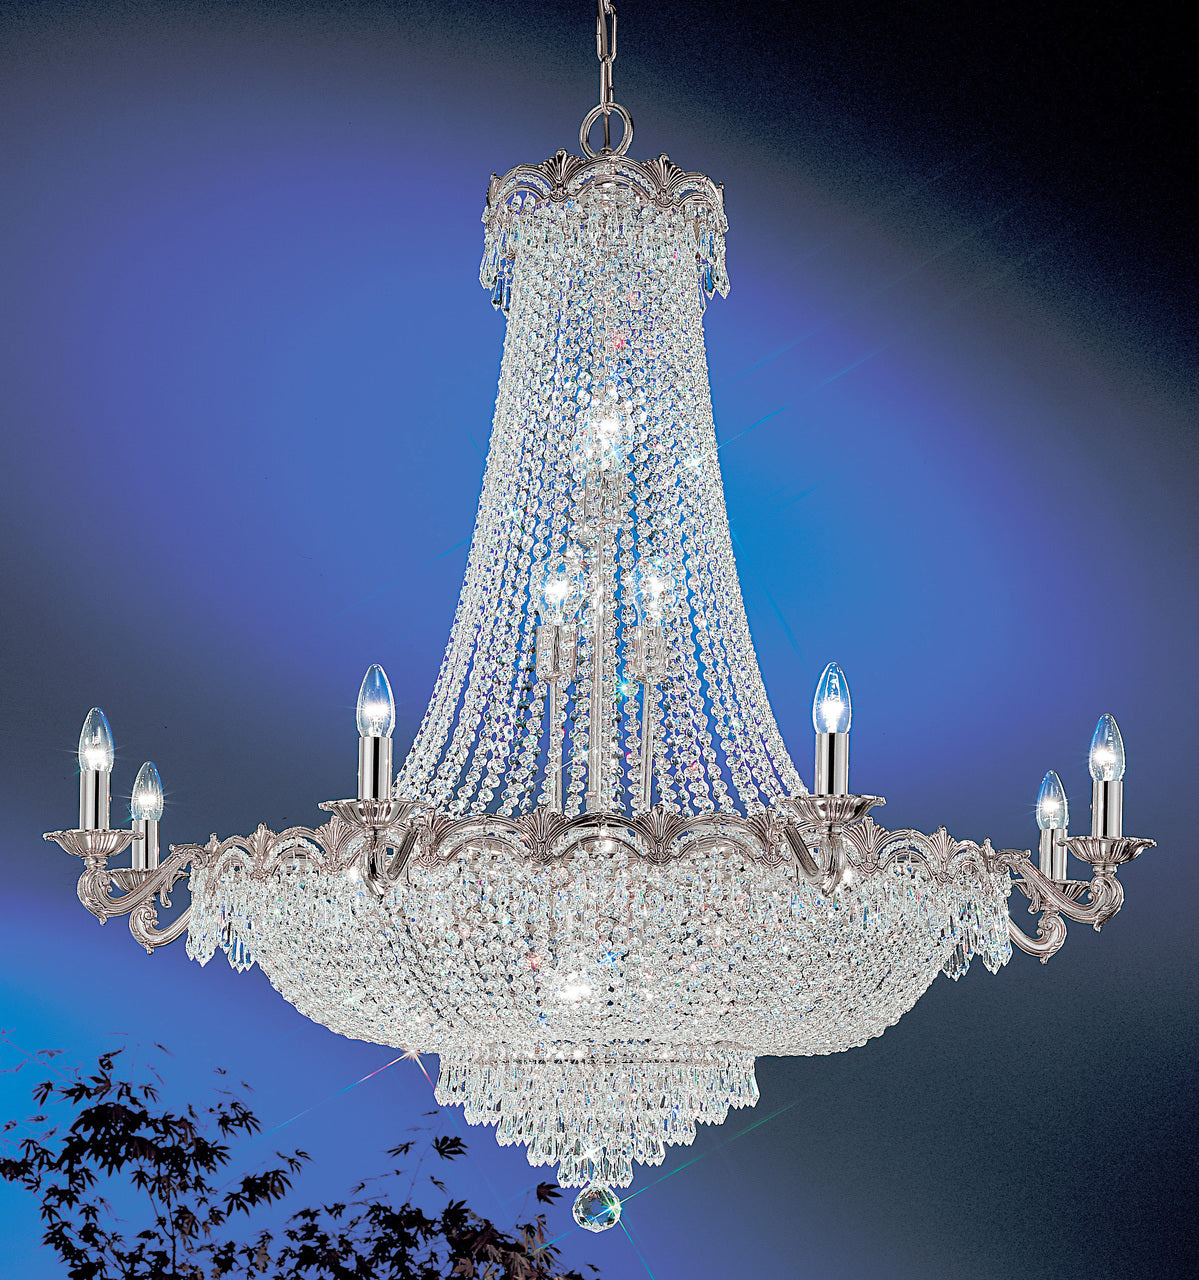 Classic Lighting 1860 CHB S Regency II Crystal Chandelier in Chrome/Black Patina (Imported from Spain)